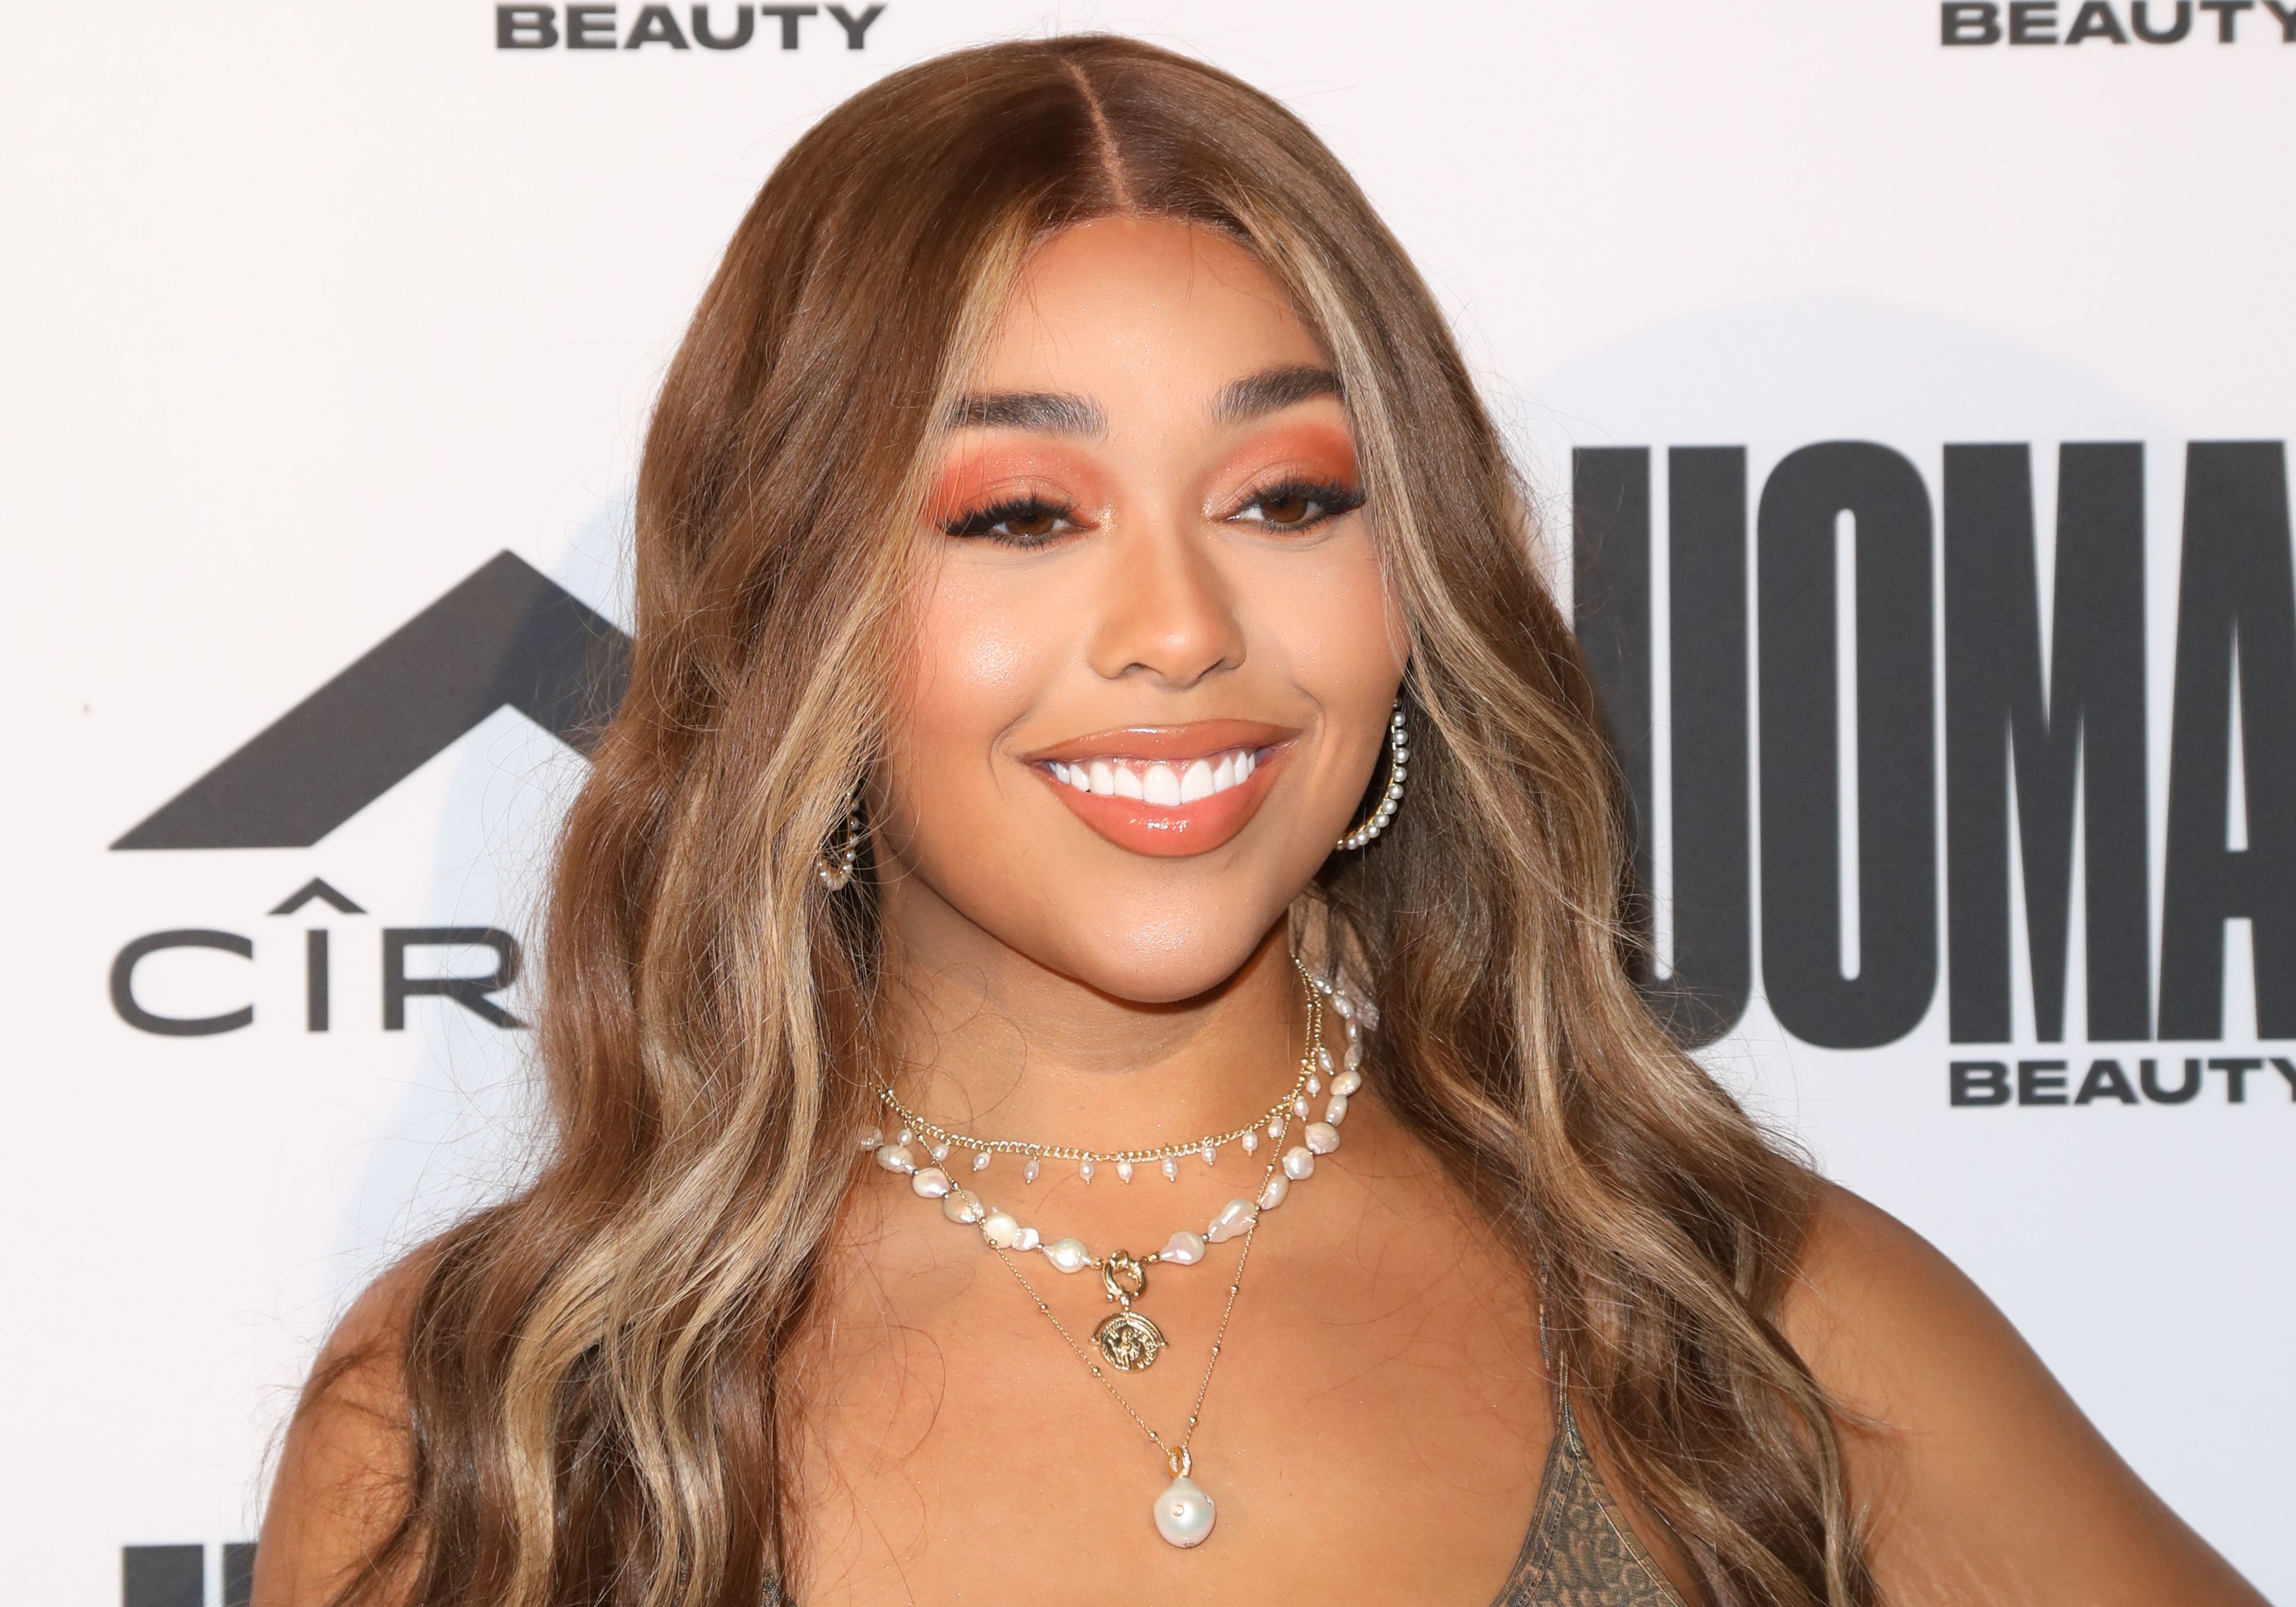 Jordyn Woods during the UOMA Summer House LA at a Private Residence on August 10, 2019. | Photo: Getty Images